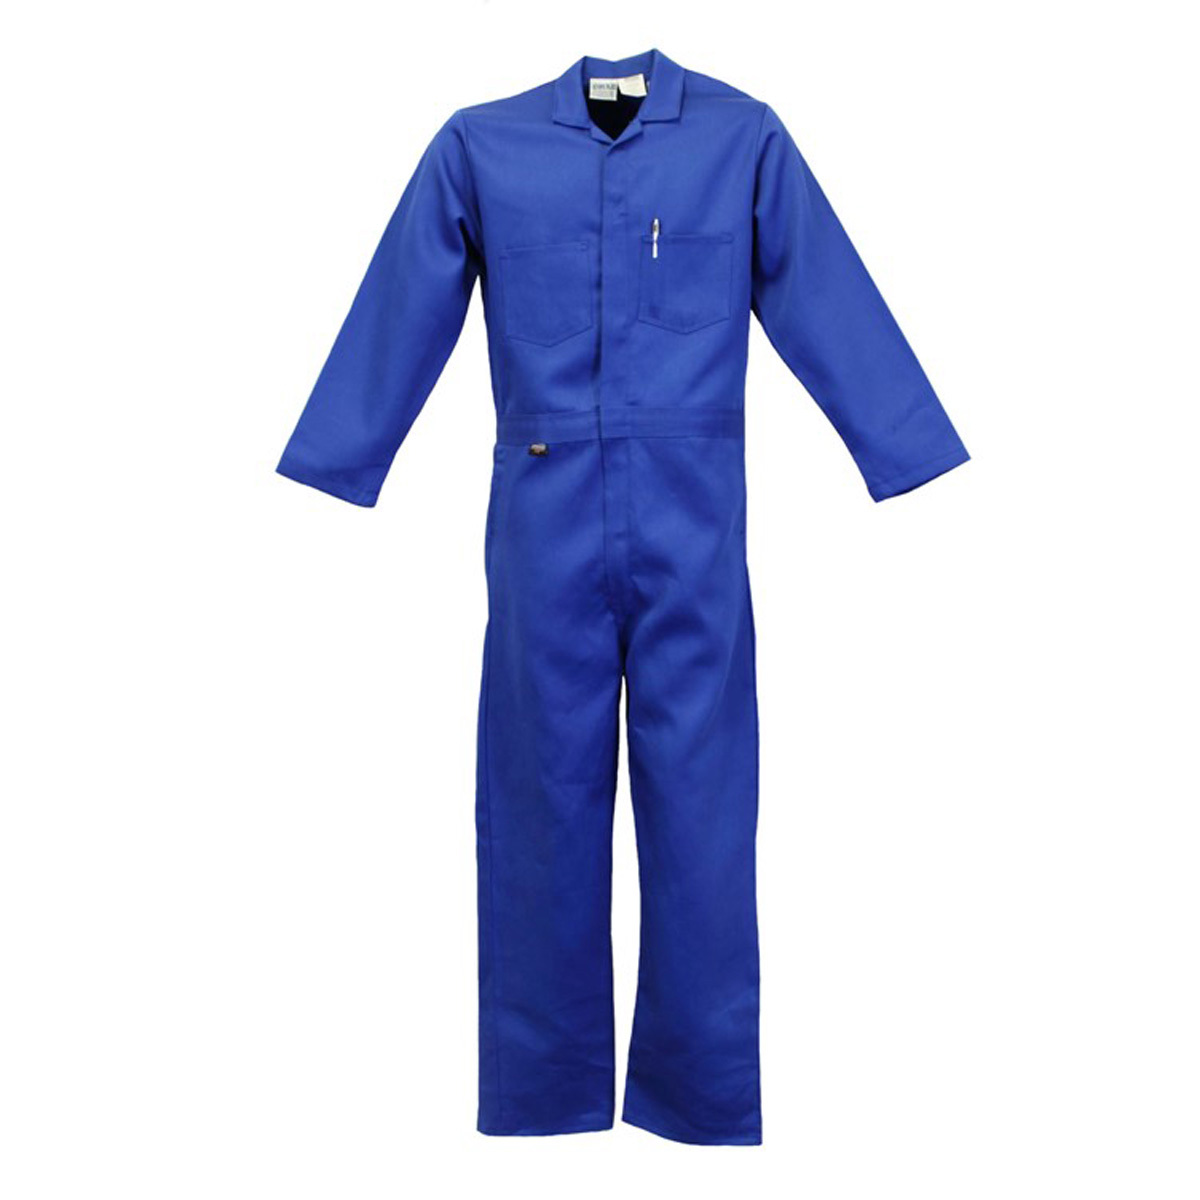 Stanco Safety Products™ Large Royal Blue Indura® Arc Rated Flame Resistant Coveralls With Front Zipper Closure